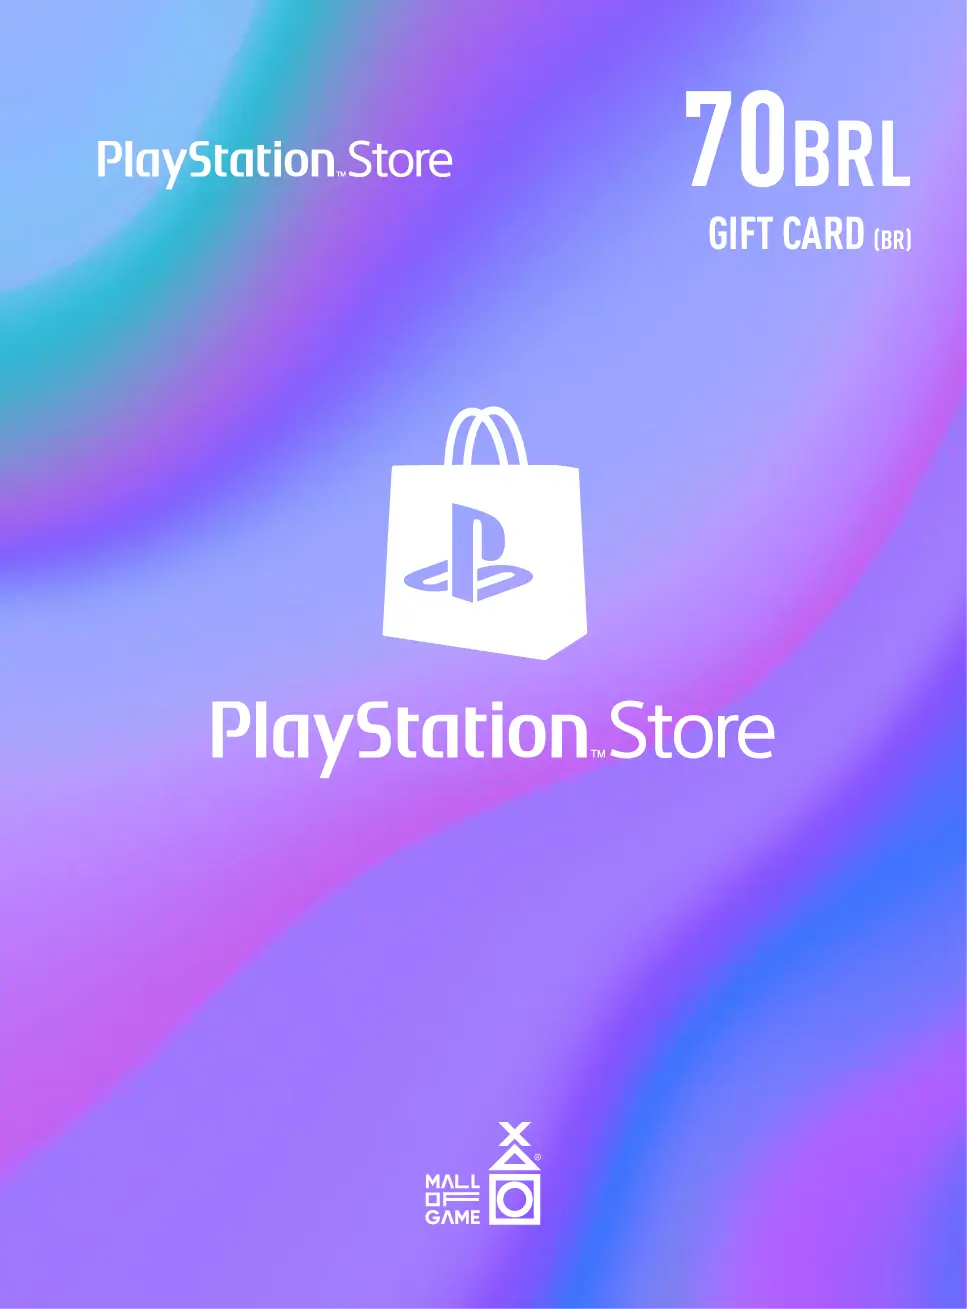 PlayStation™Store BRL70 Gift Cards (BR)